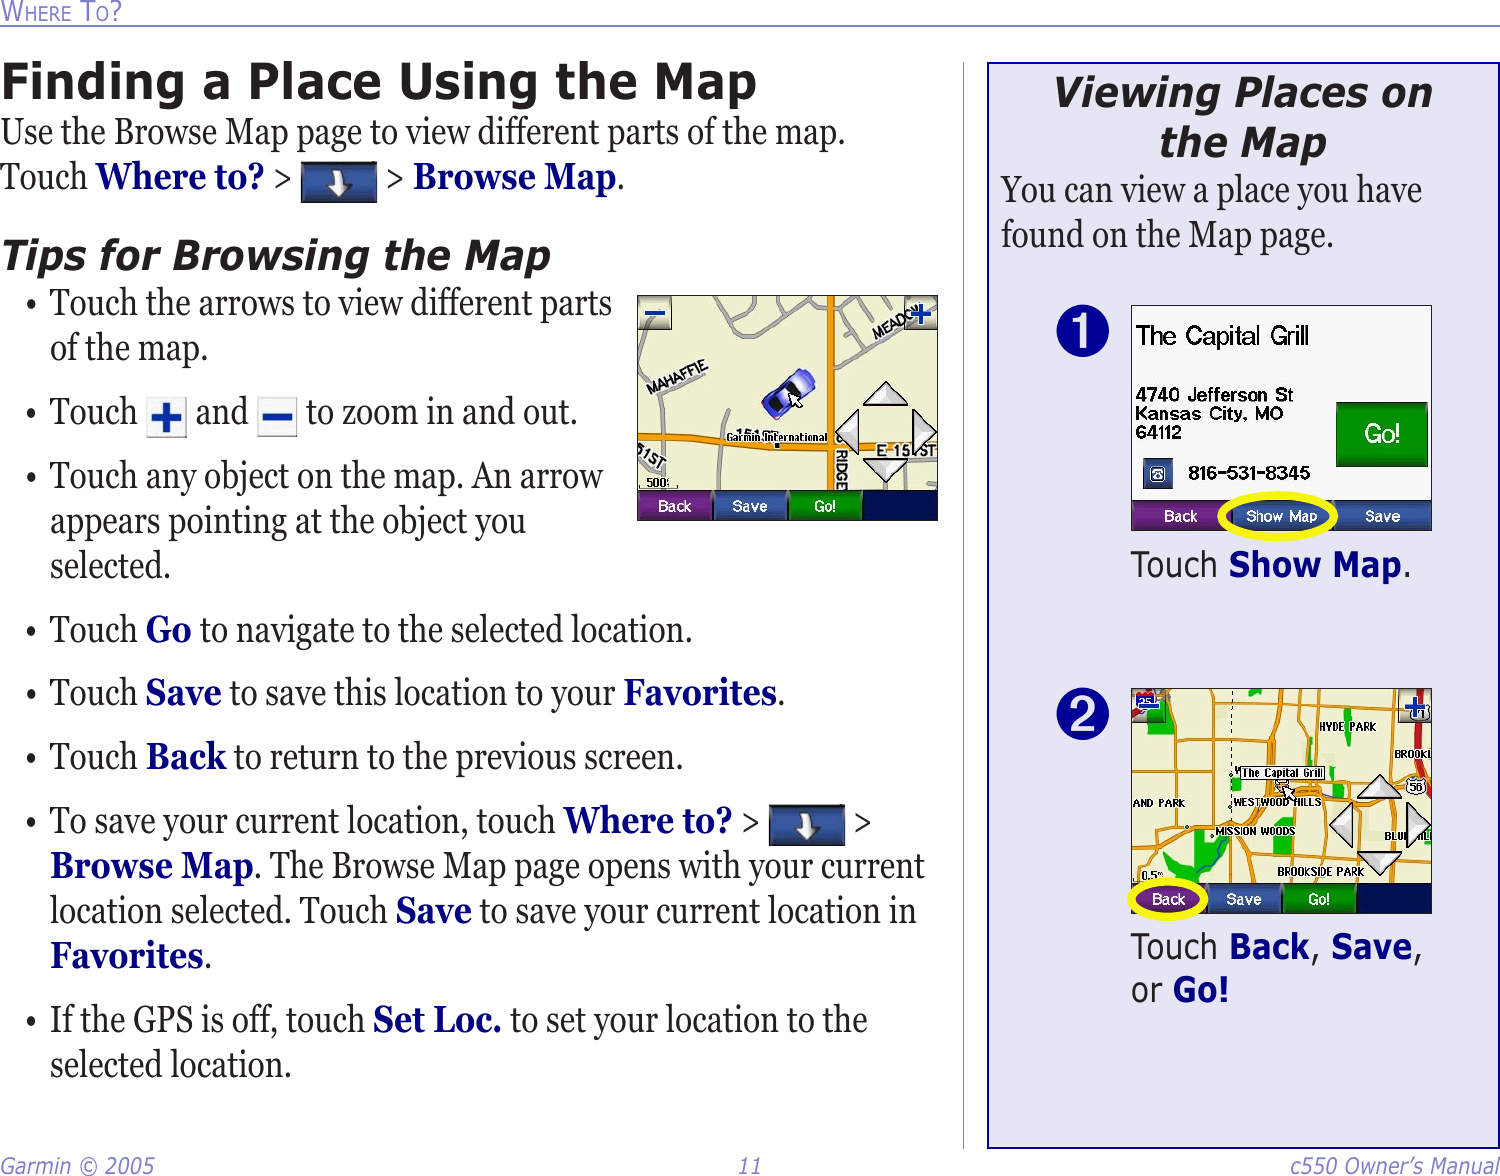 Garmin © 2005  11  c550 Owner’s ManualWHERE TO?Finding a Place Using the MapUse the Browse Map page to view different parts of the map. Touch Where to? &gt;   &gt; Browse Map. Tips for Browsing the Map•  Touch the arrows to view different parts of the map. •  Touch   and   to zoom in and out. •  Touch any object on the map. An arrow appears pointing at the object you selected. •  Touch Go to navigate to the selected location. •  Touch Save to save this location to your Favorites. •  Touch Back to return to the previous screen.•  To save your current location, touch Where to? &gt;   &gt; Browse Map. The Browse Map page opens with your current location selected. Touch Save to save your current location in Favorites.•  If the GPS is off, touch Set Loc. to set your location to the selected location. Viewing Places on  the MapYou can view a place you have found on the Map page. Touch Show Map.➊Touch Back, Save, or Go! ➋